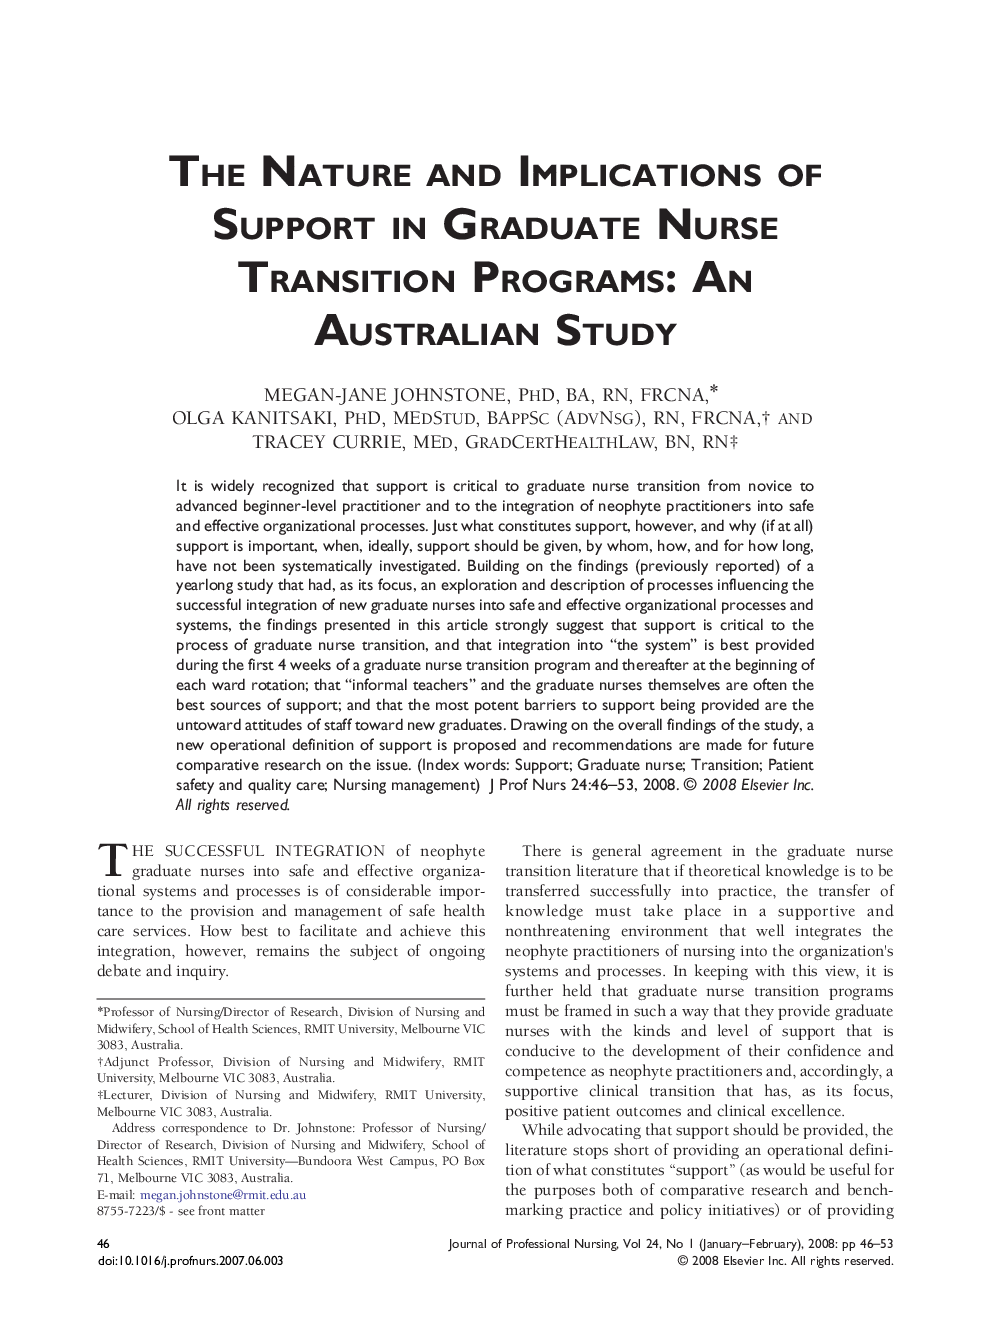 The Nature and Implications of Support in Graduate Nurse Transition Programs: An Australian Study